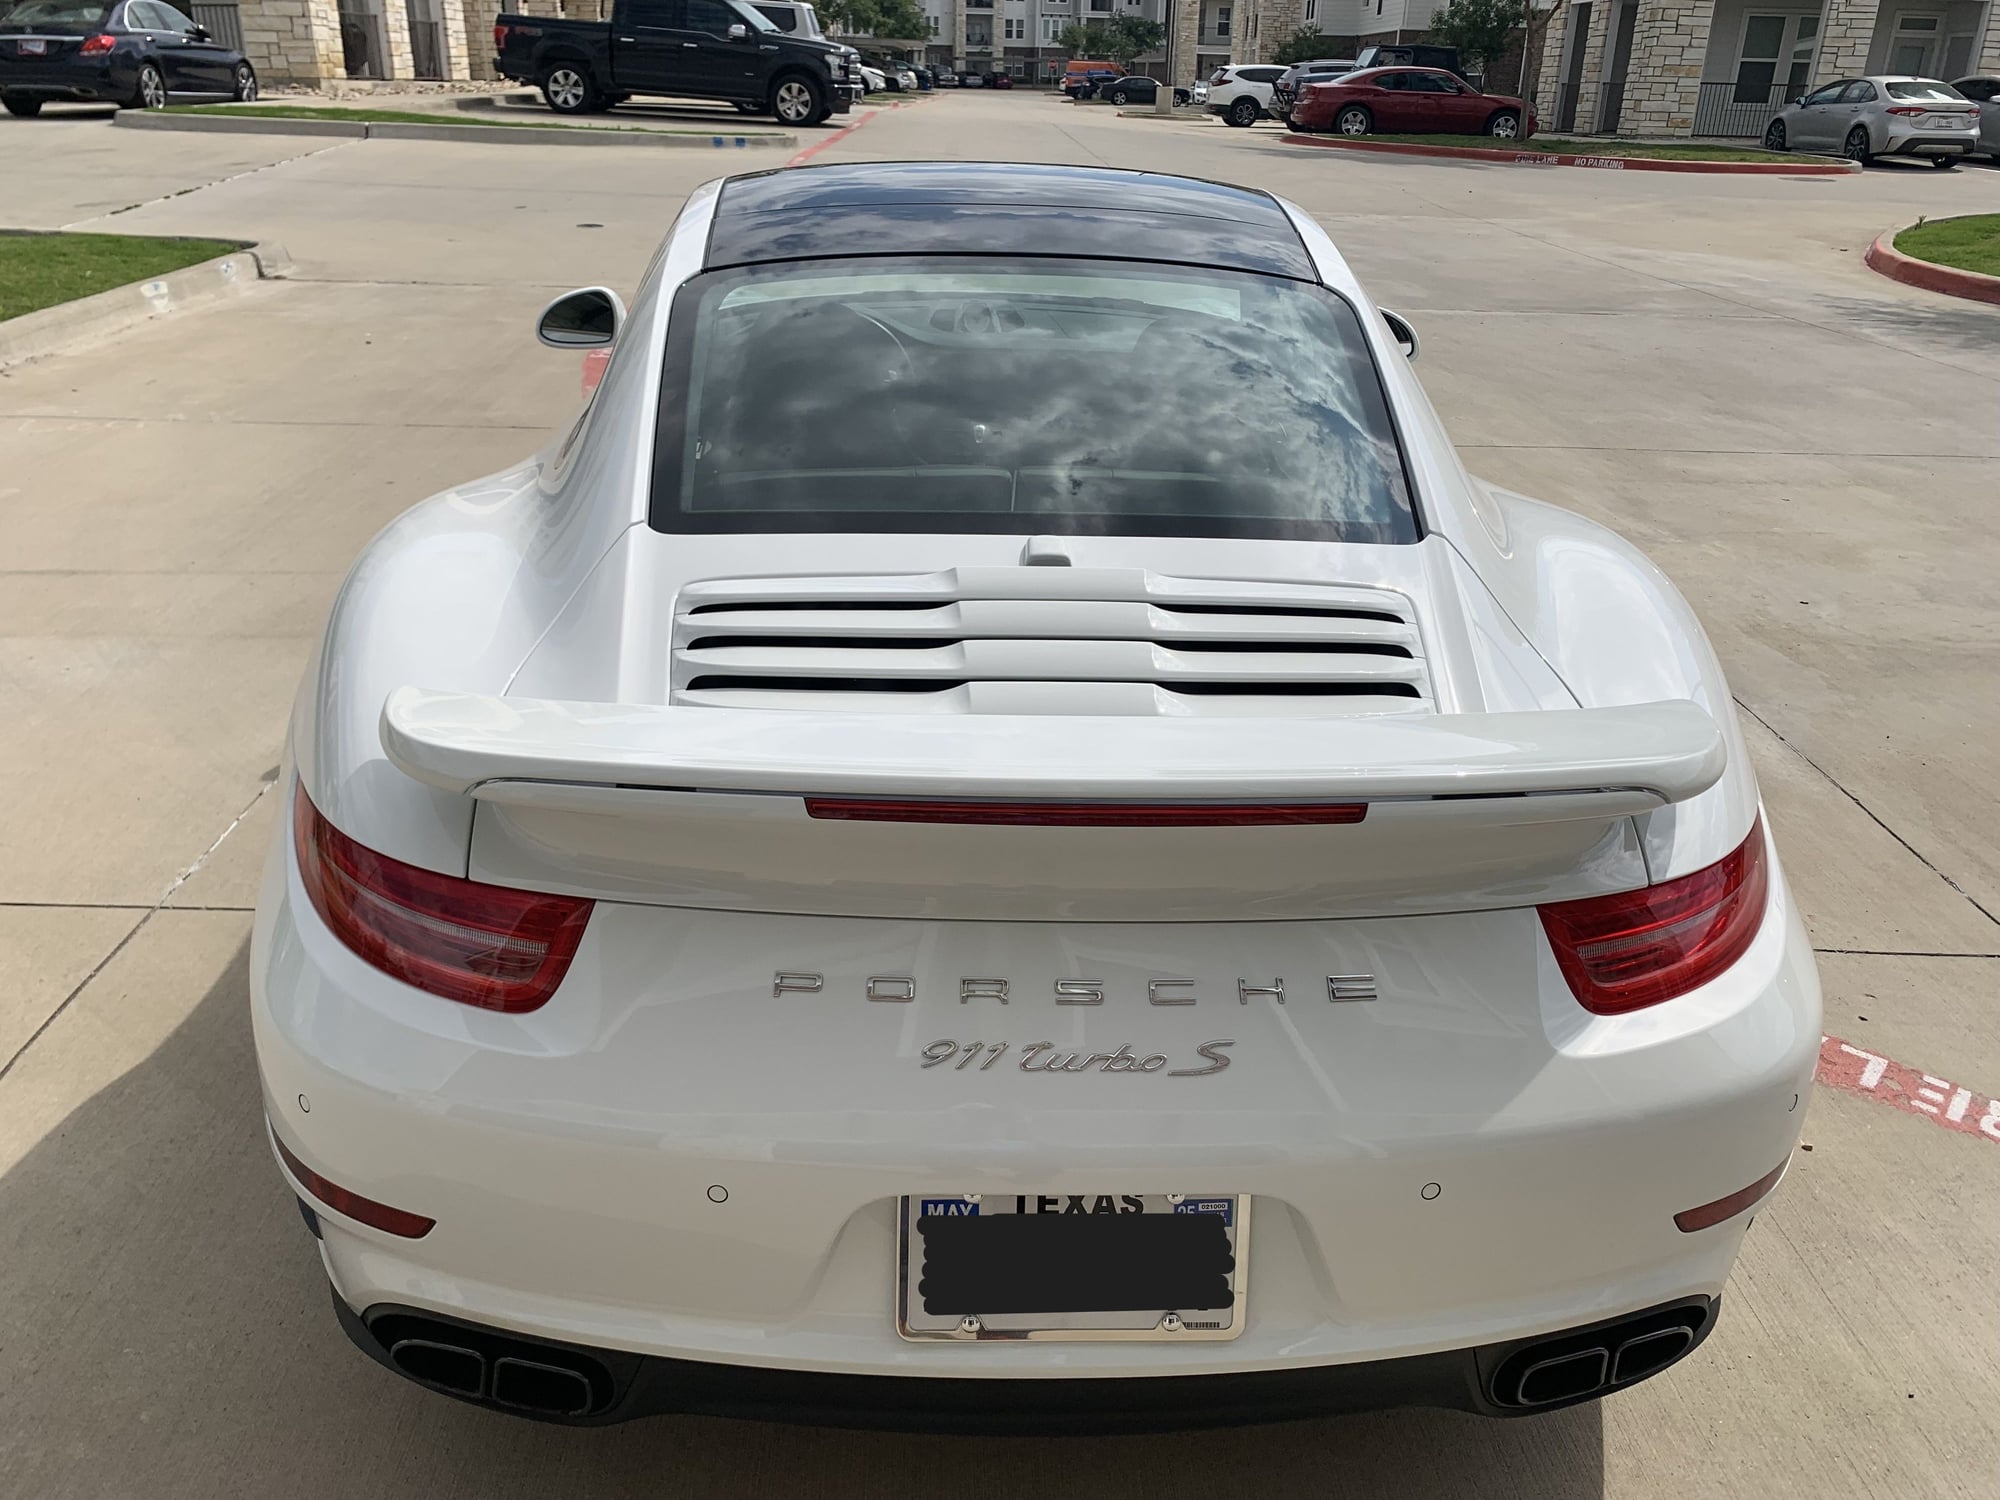 2014 Porsche 911 - 2014 TTS with 9,450 miles - Used - VIN WP0AD2A94ES167720 - 6 cyl - AWD - Automatic - Coupe - White - Rockwall, TX 75087, United States